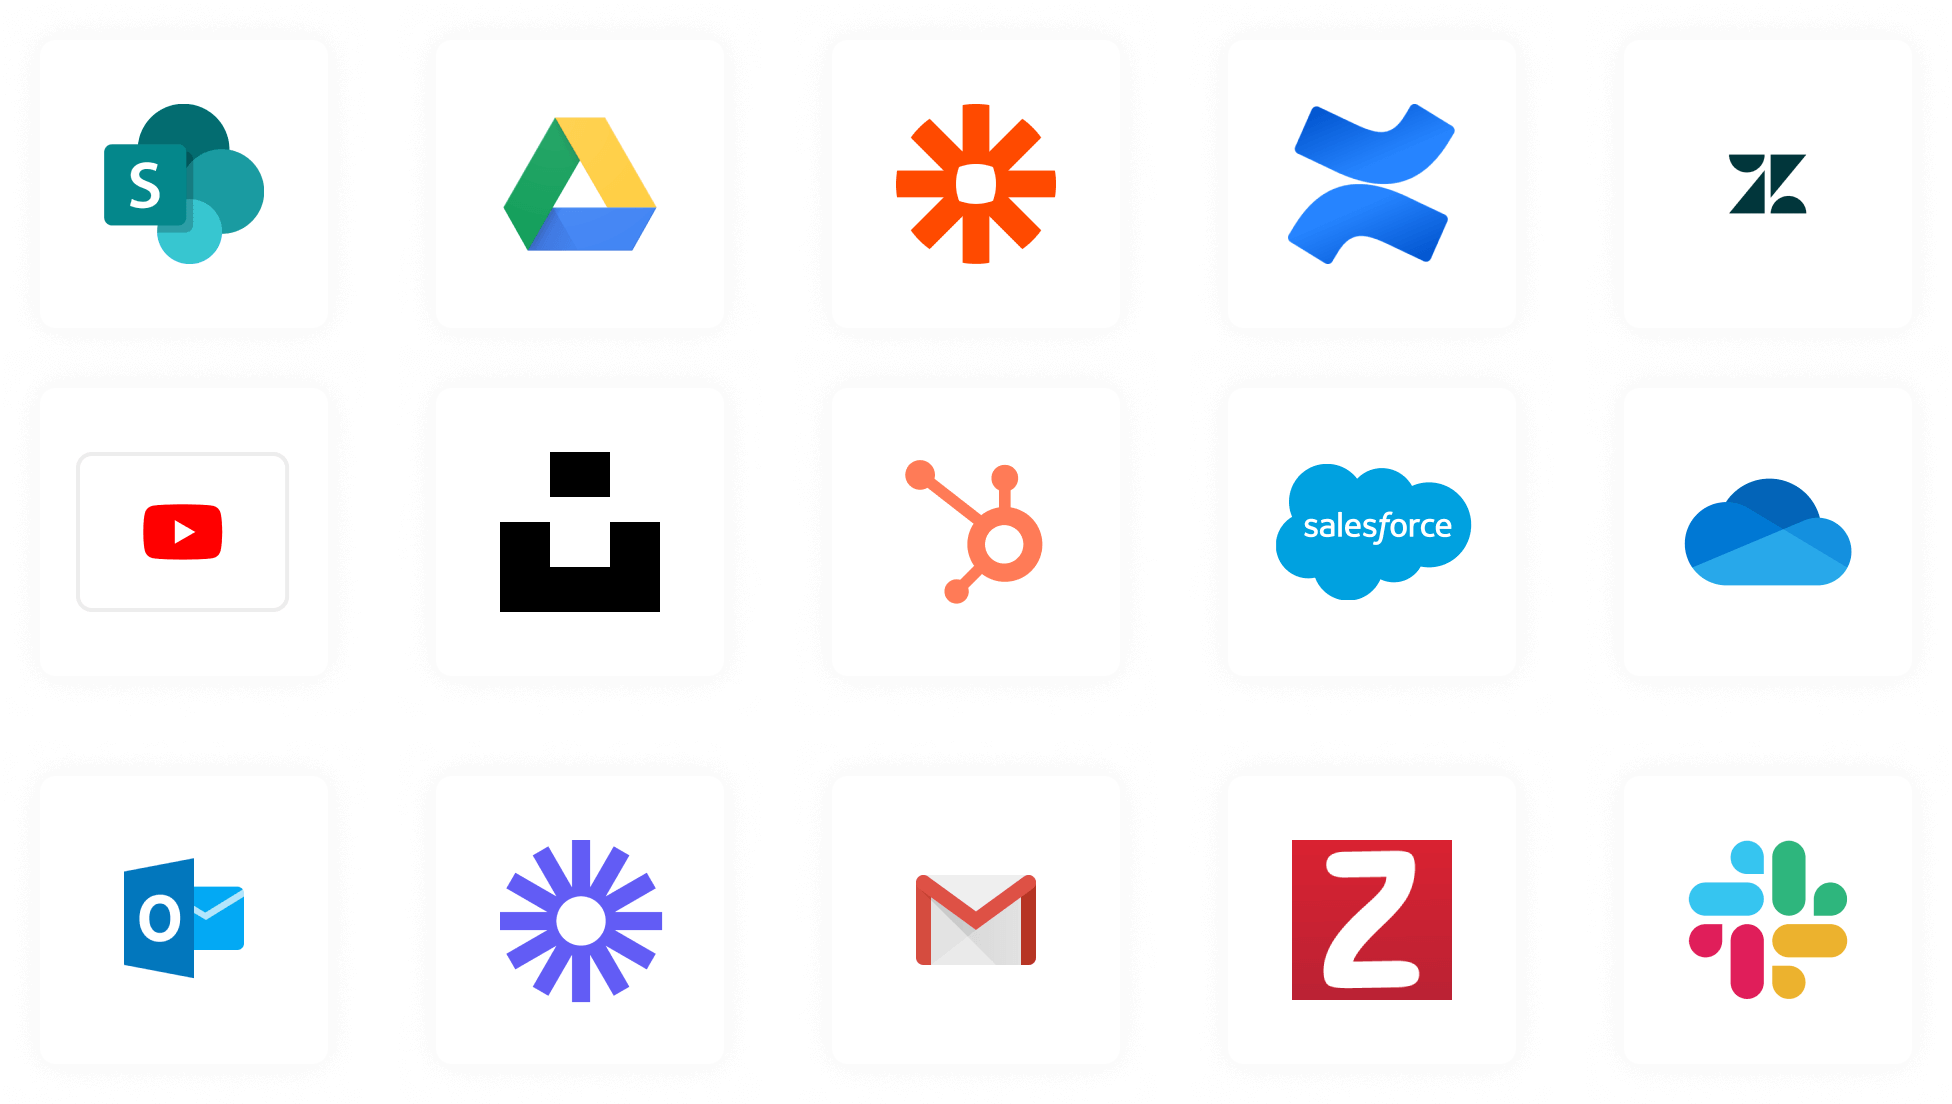 A collection of various logos displayed against a black background.